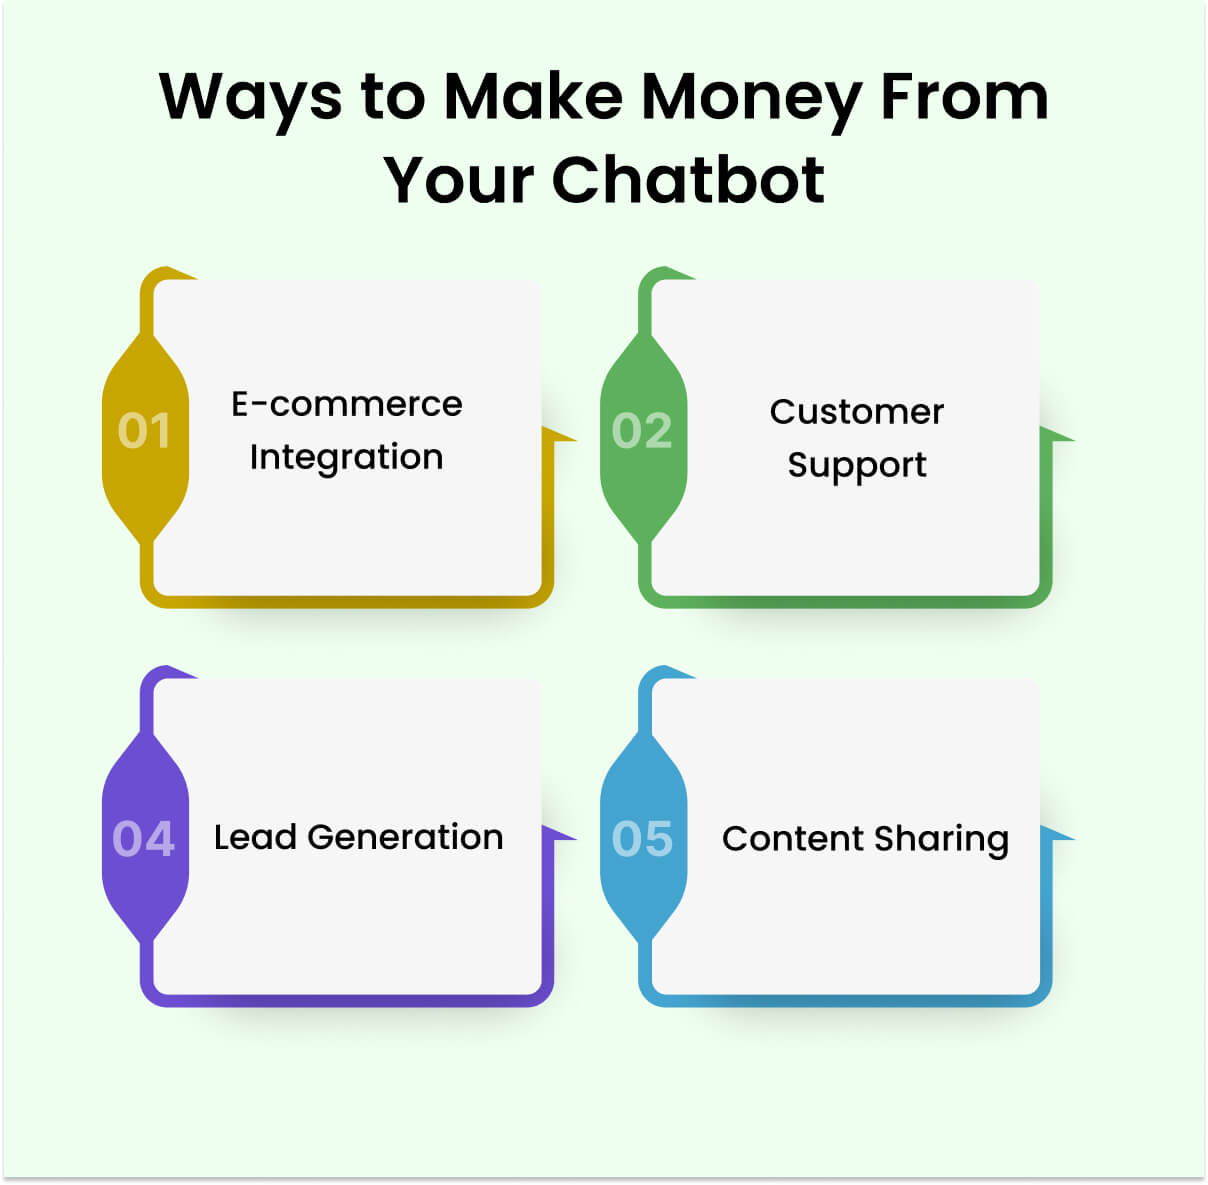 Way to make money from your chatbot